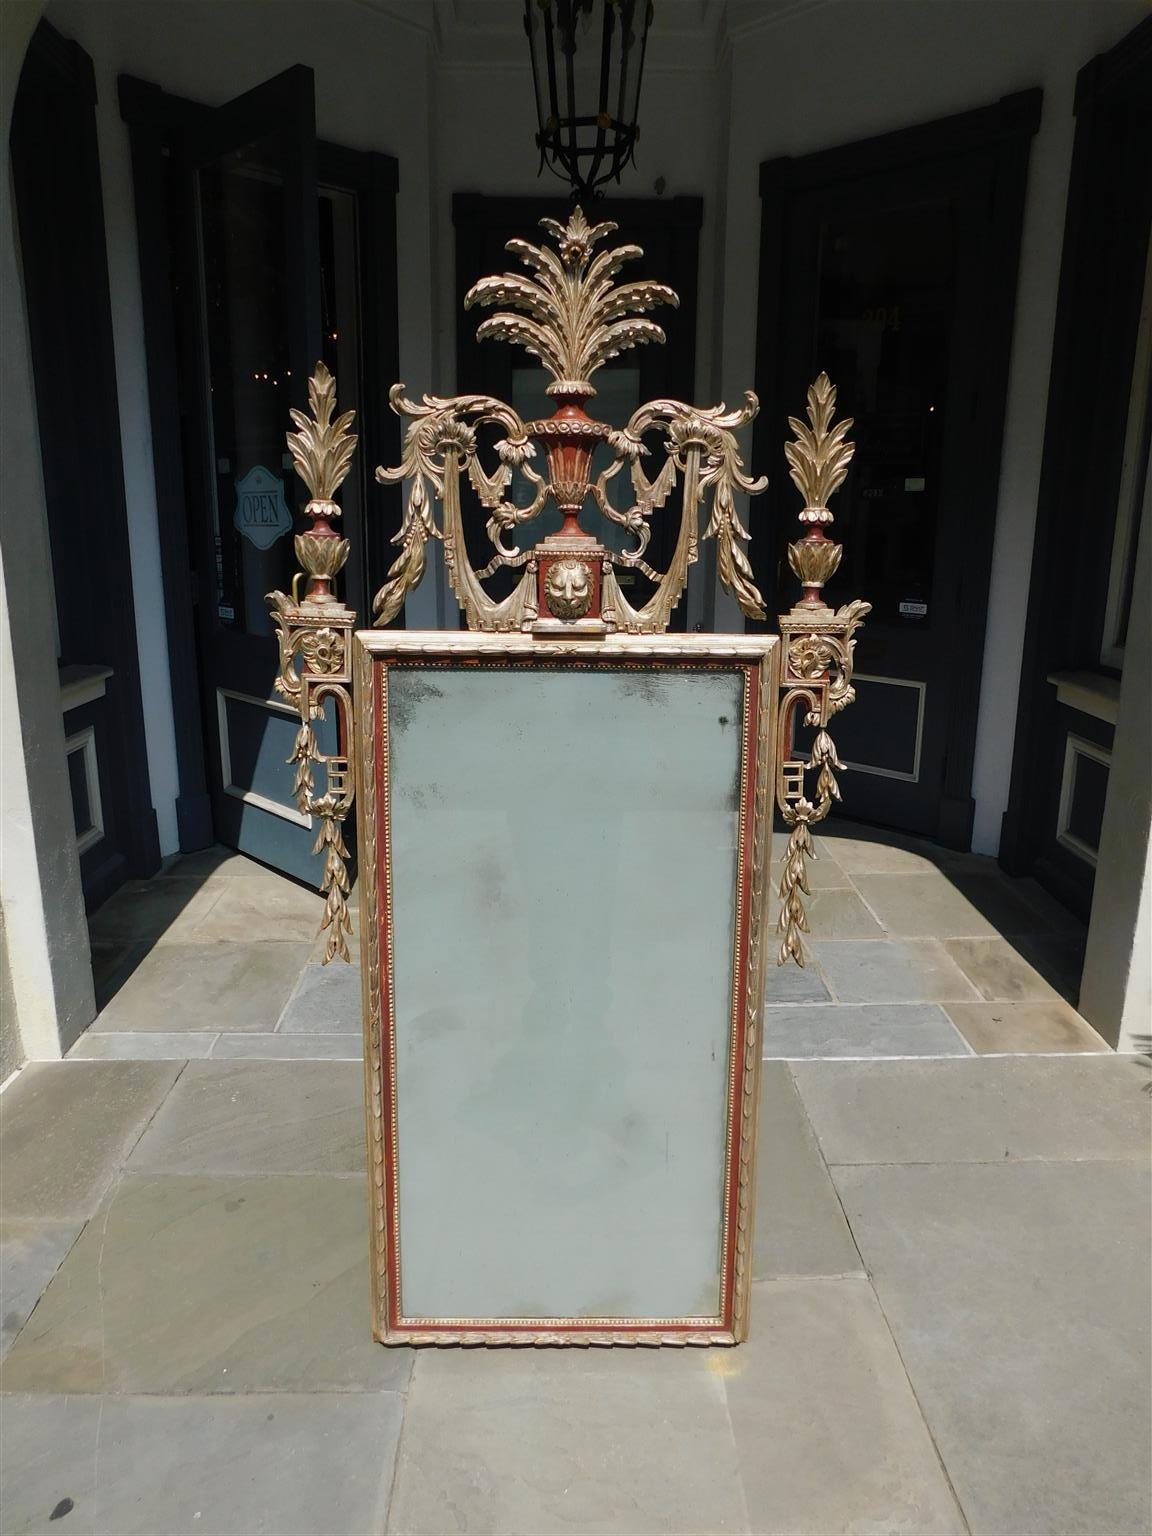 Italian neoclassical silver gilt wood & gesso red lacquered wall mirror with a central urn lion mask cartouche decorated with scrolled foliate plumes and ribbon drapery, flanking foliate urns with graduated bell flowers, and a floral carved exterior